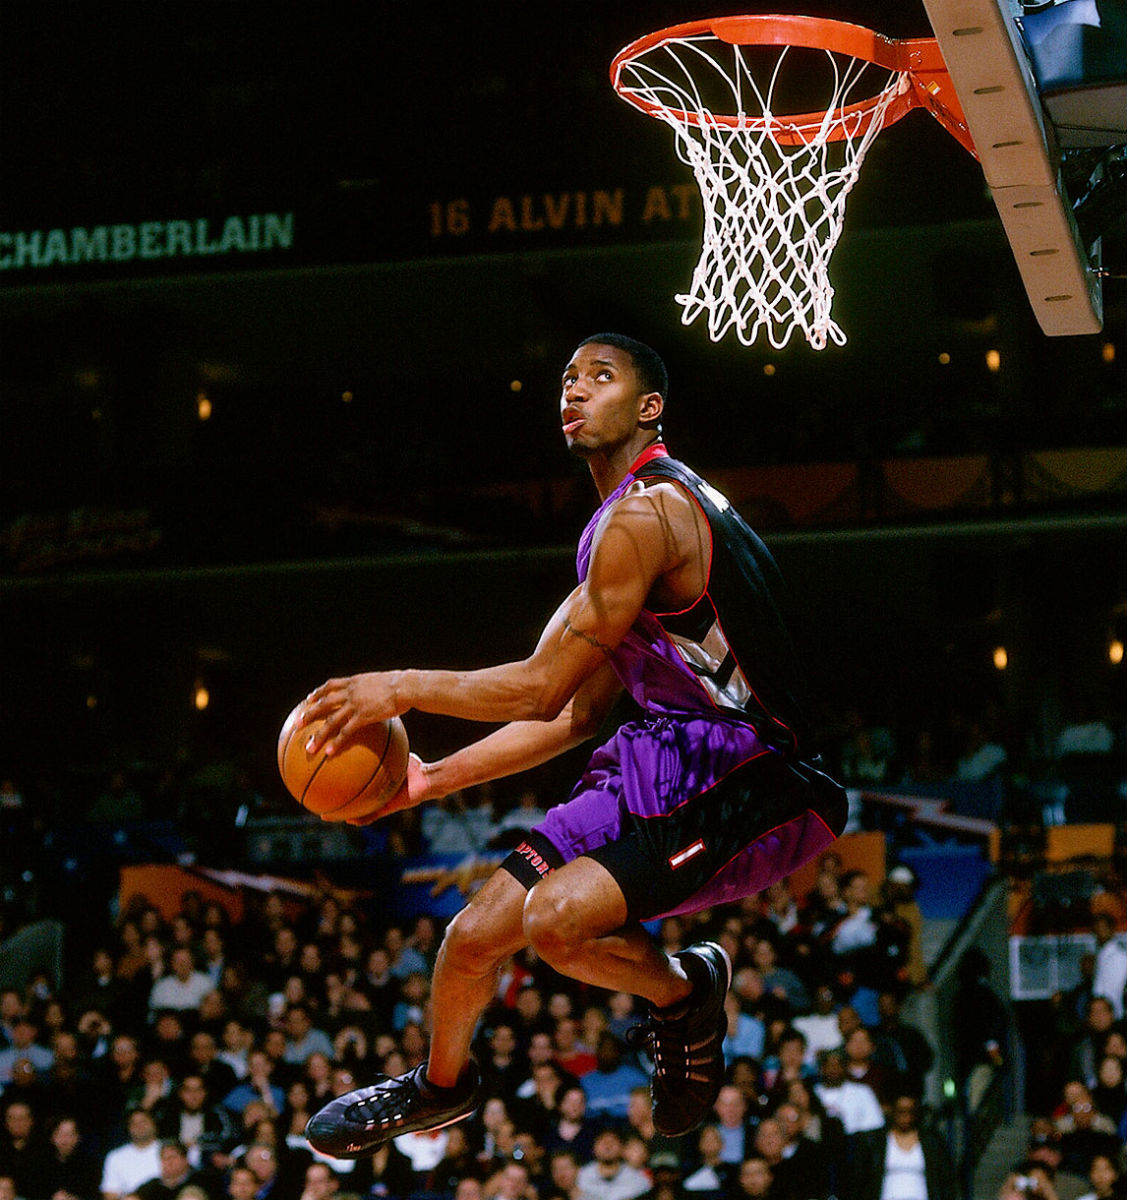 Tracy McGrady Wears the adidas Lithicon in the 2000 Dunk Contest